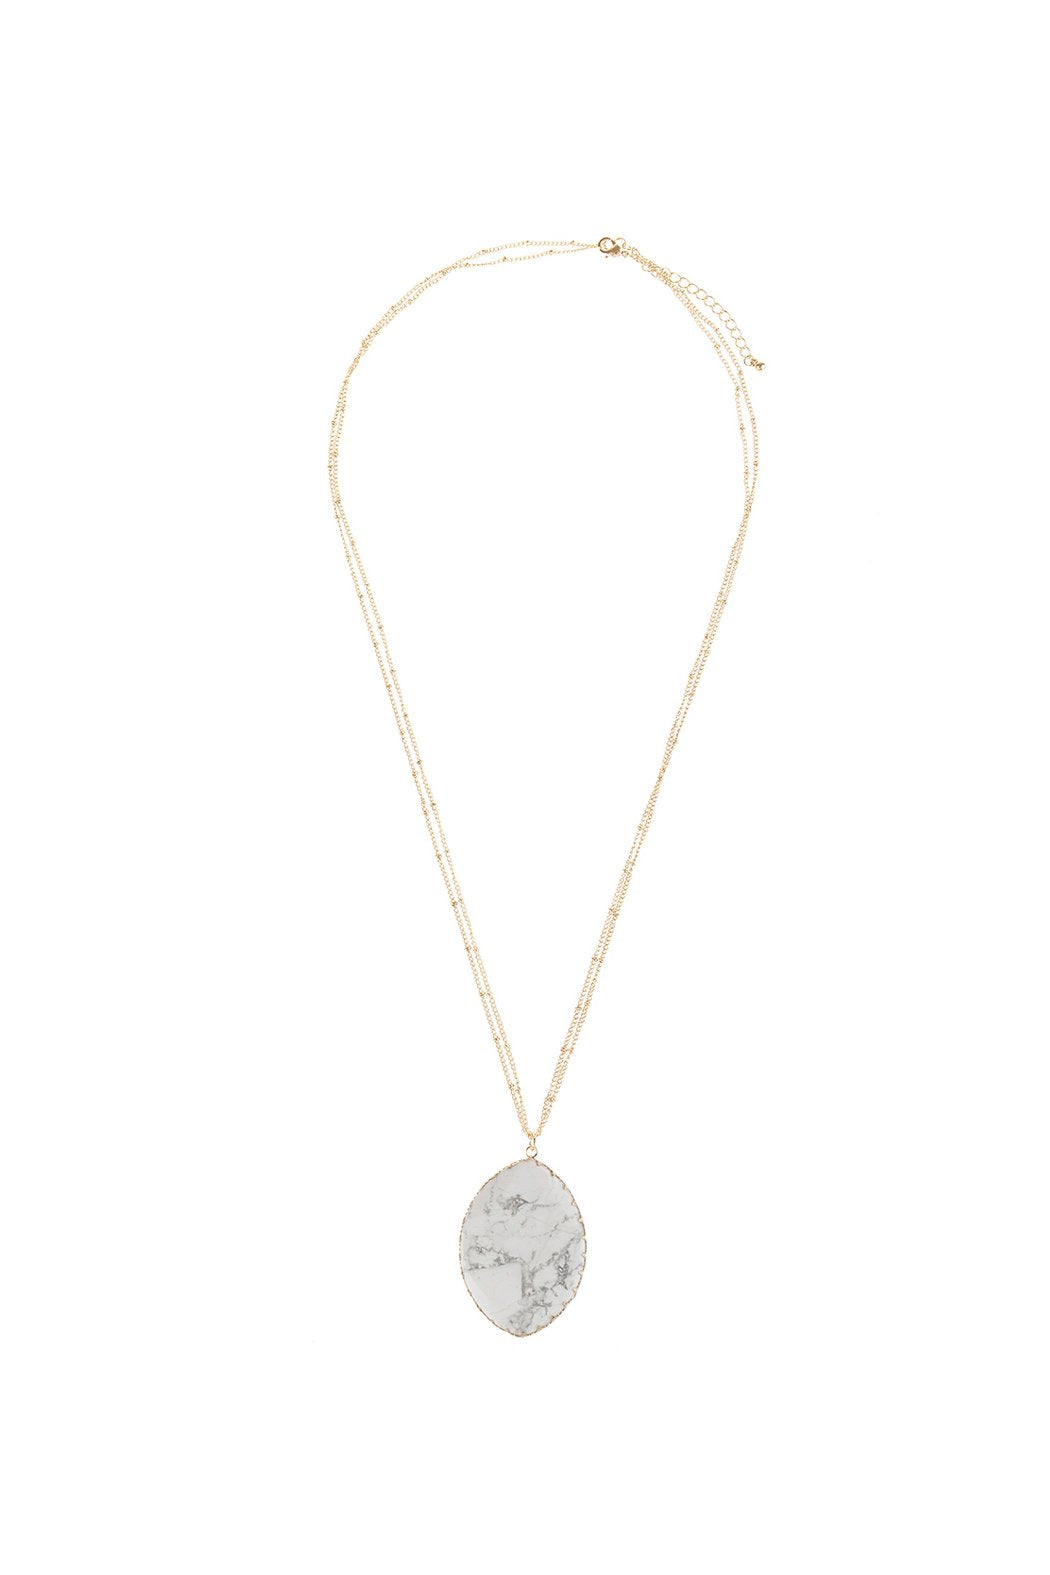 Natural Stone Wrap Oval Pendant Chain Necklace - LOLA LUXE